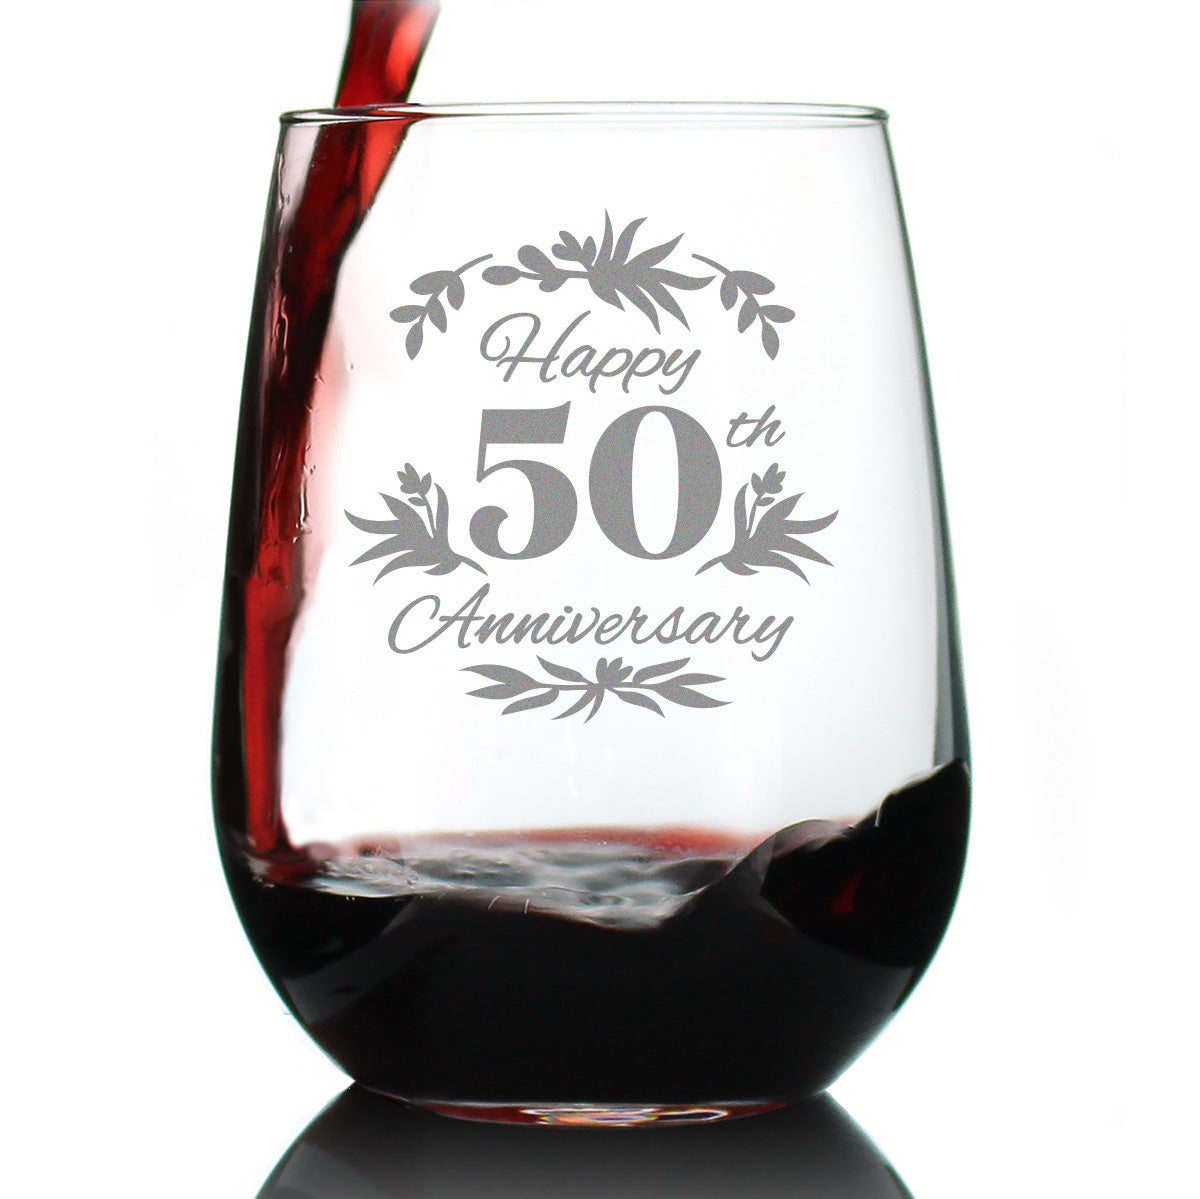 Happy 50th Anniversary - Stemless Wine Glass Gifts for Women & Men - 50 Year Anniversary Party Decor - Large Glasses